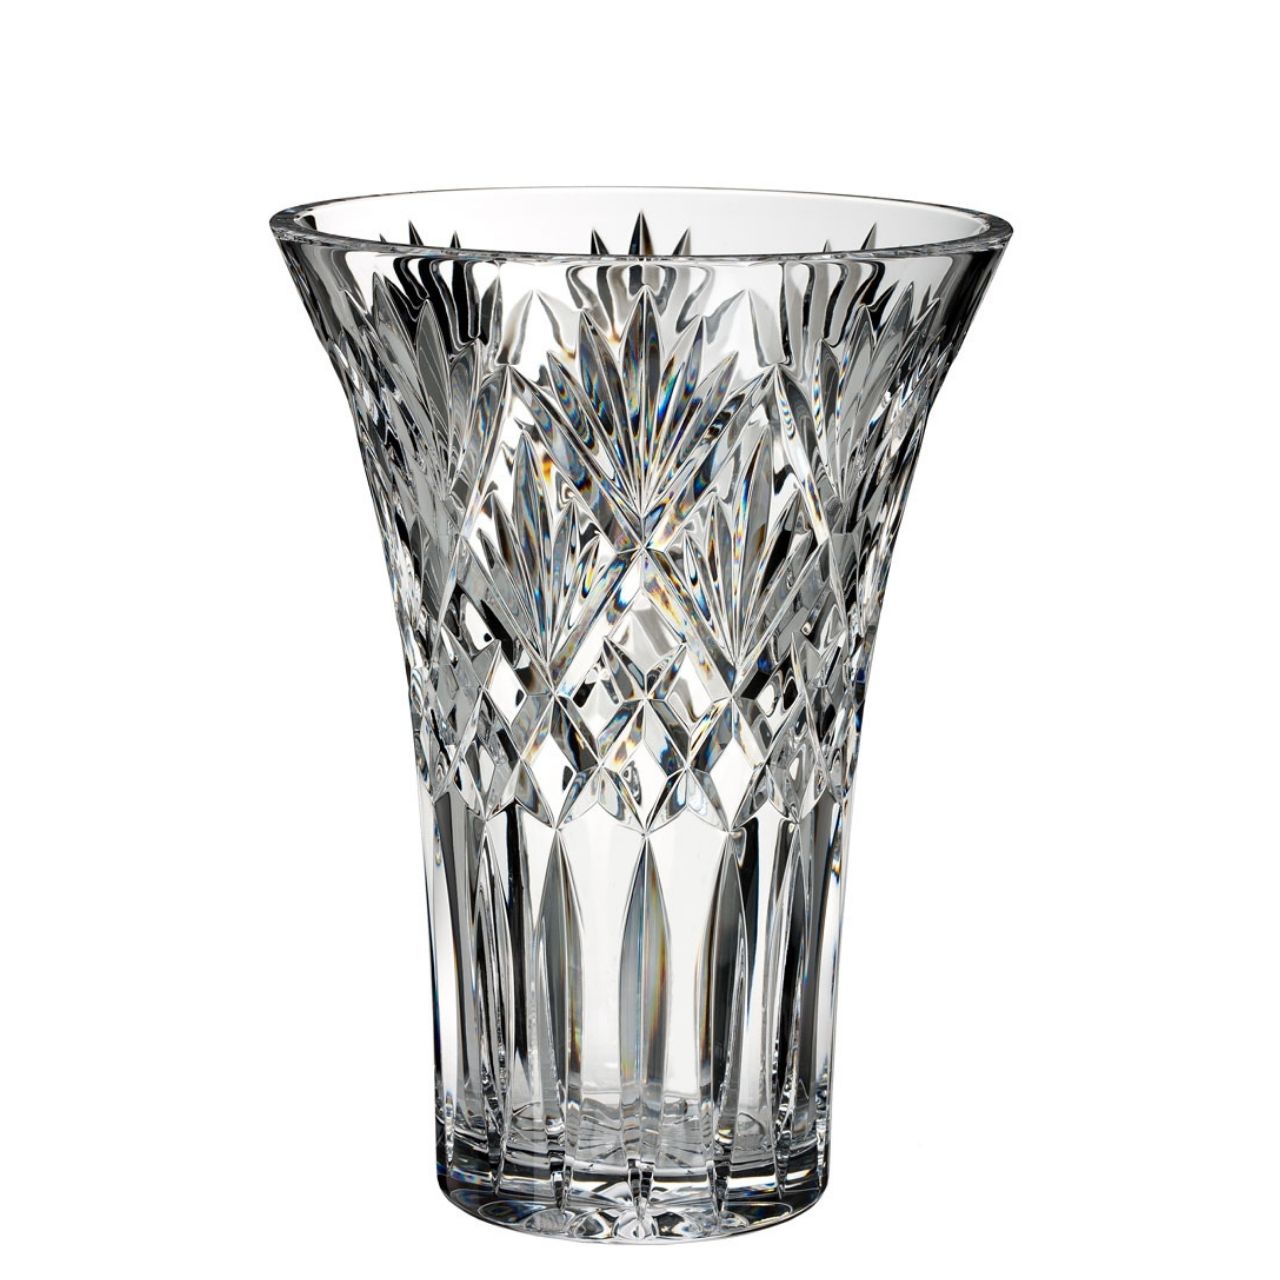 Waterford Crystal Cassidy 10'' Vase  The Cassidy pattern exemplifies a traditional Waterford Crystal cutting pattern, capturing a tremendous amount of sparkle. This beautiful 10 inch vase boasts an updated shape bringing a luxurious, fresh perspective to your home decor and entertaining.